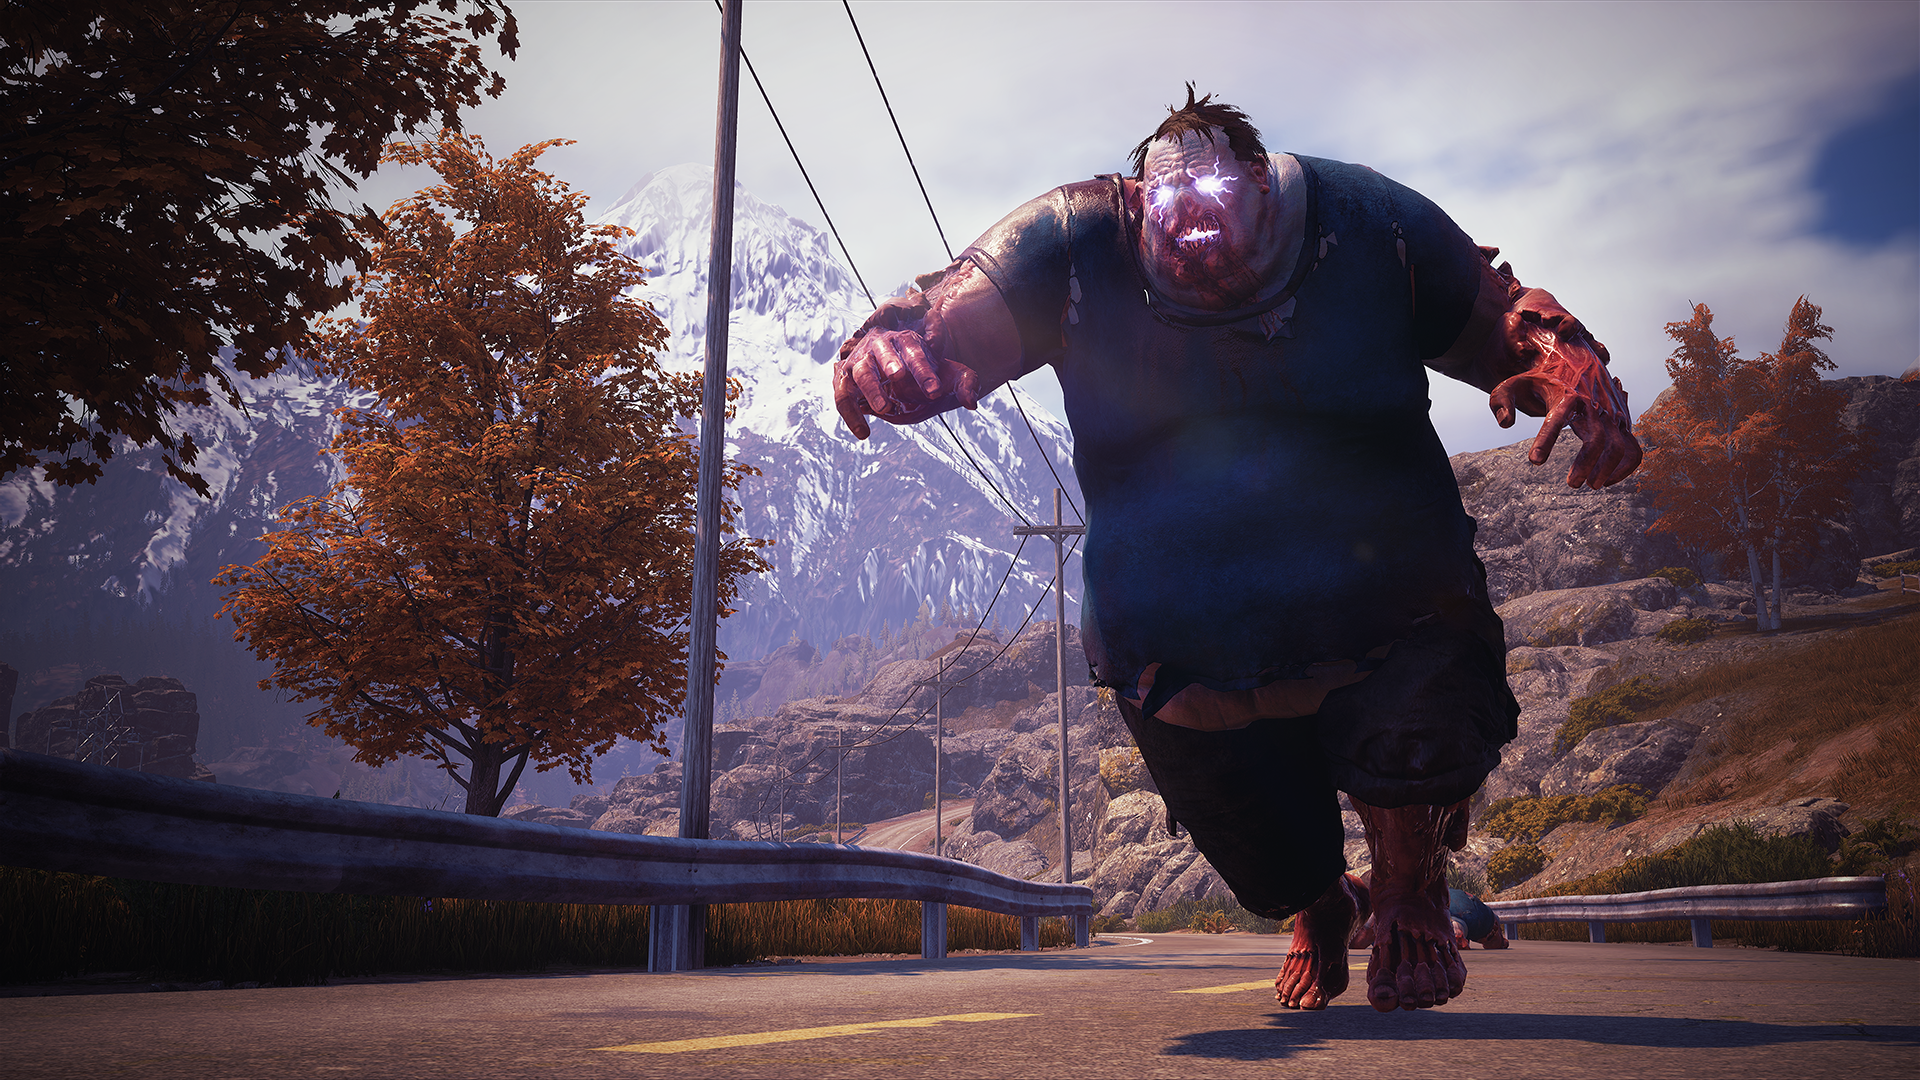 State of Decay 2: Juggernaut Edition Update Adds Infesting Hordes